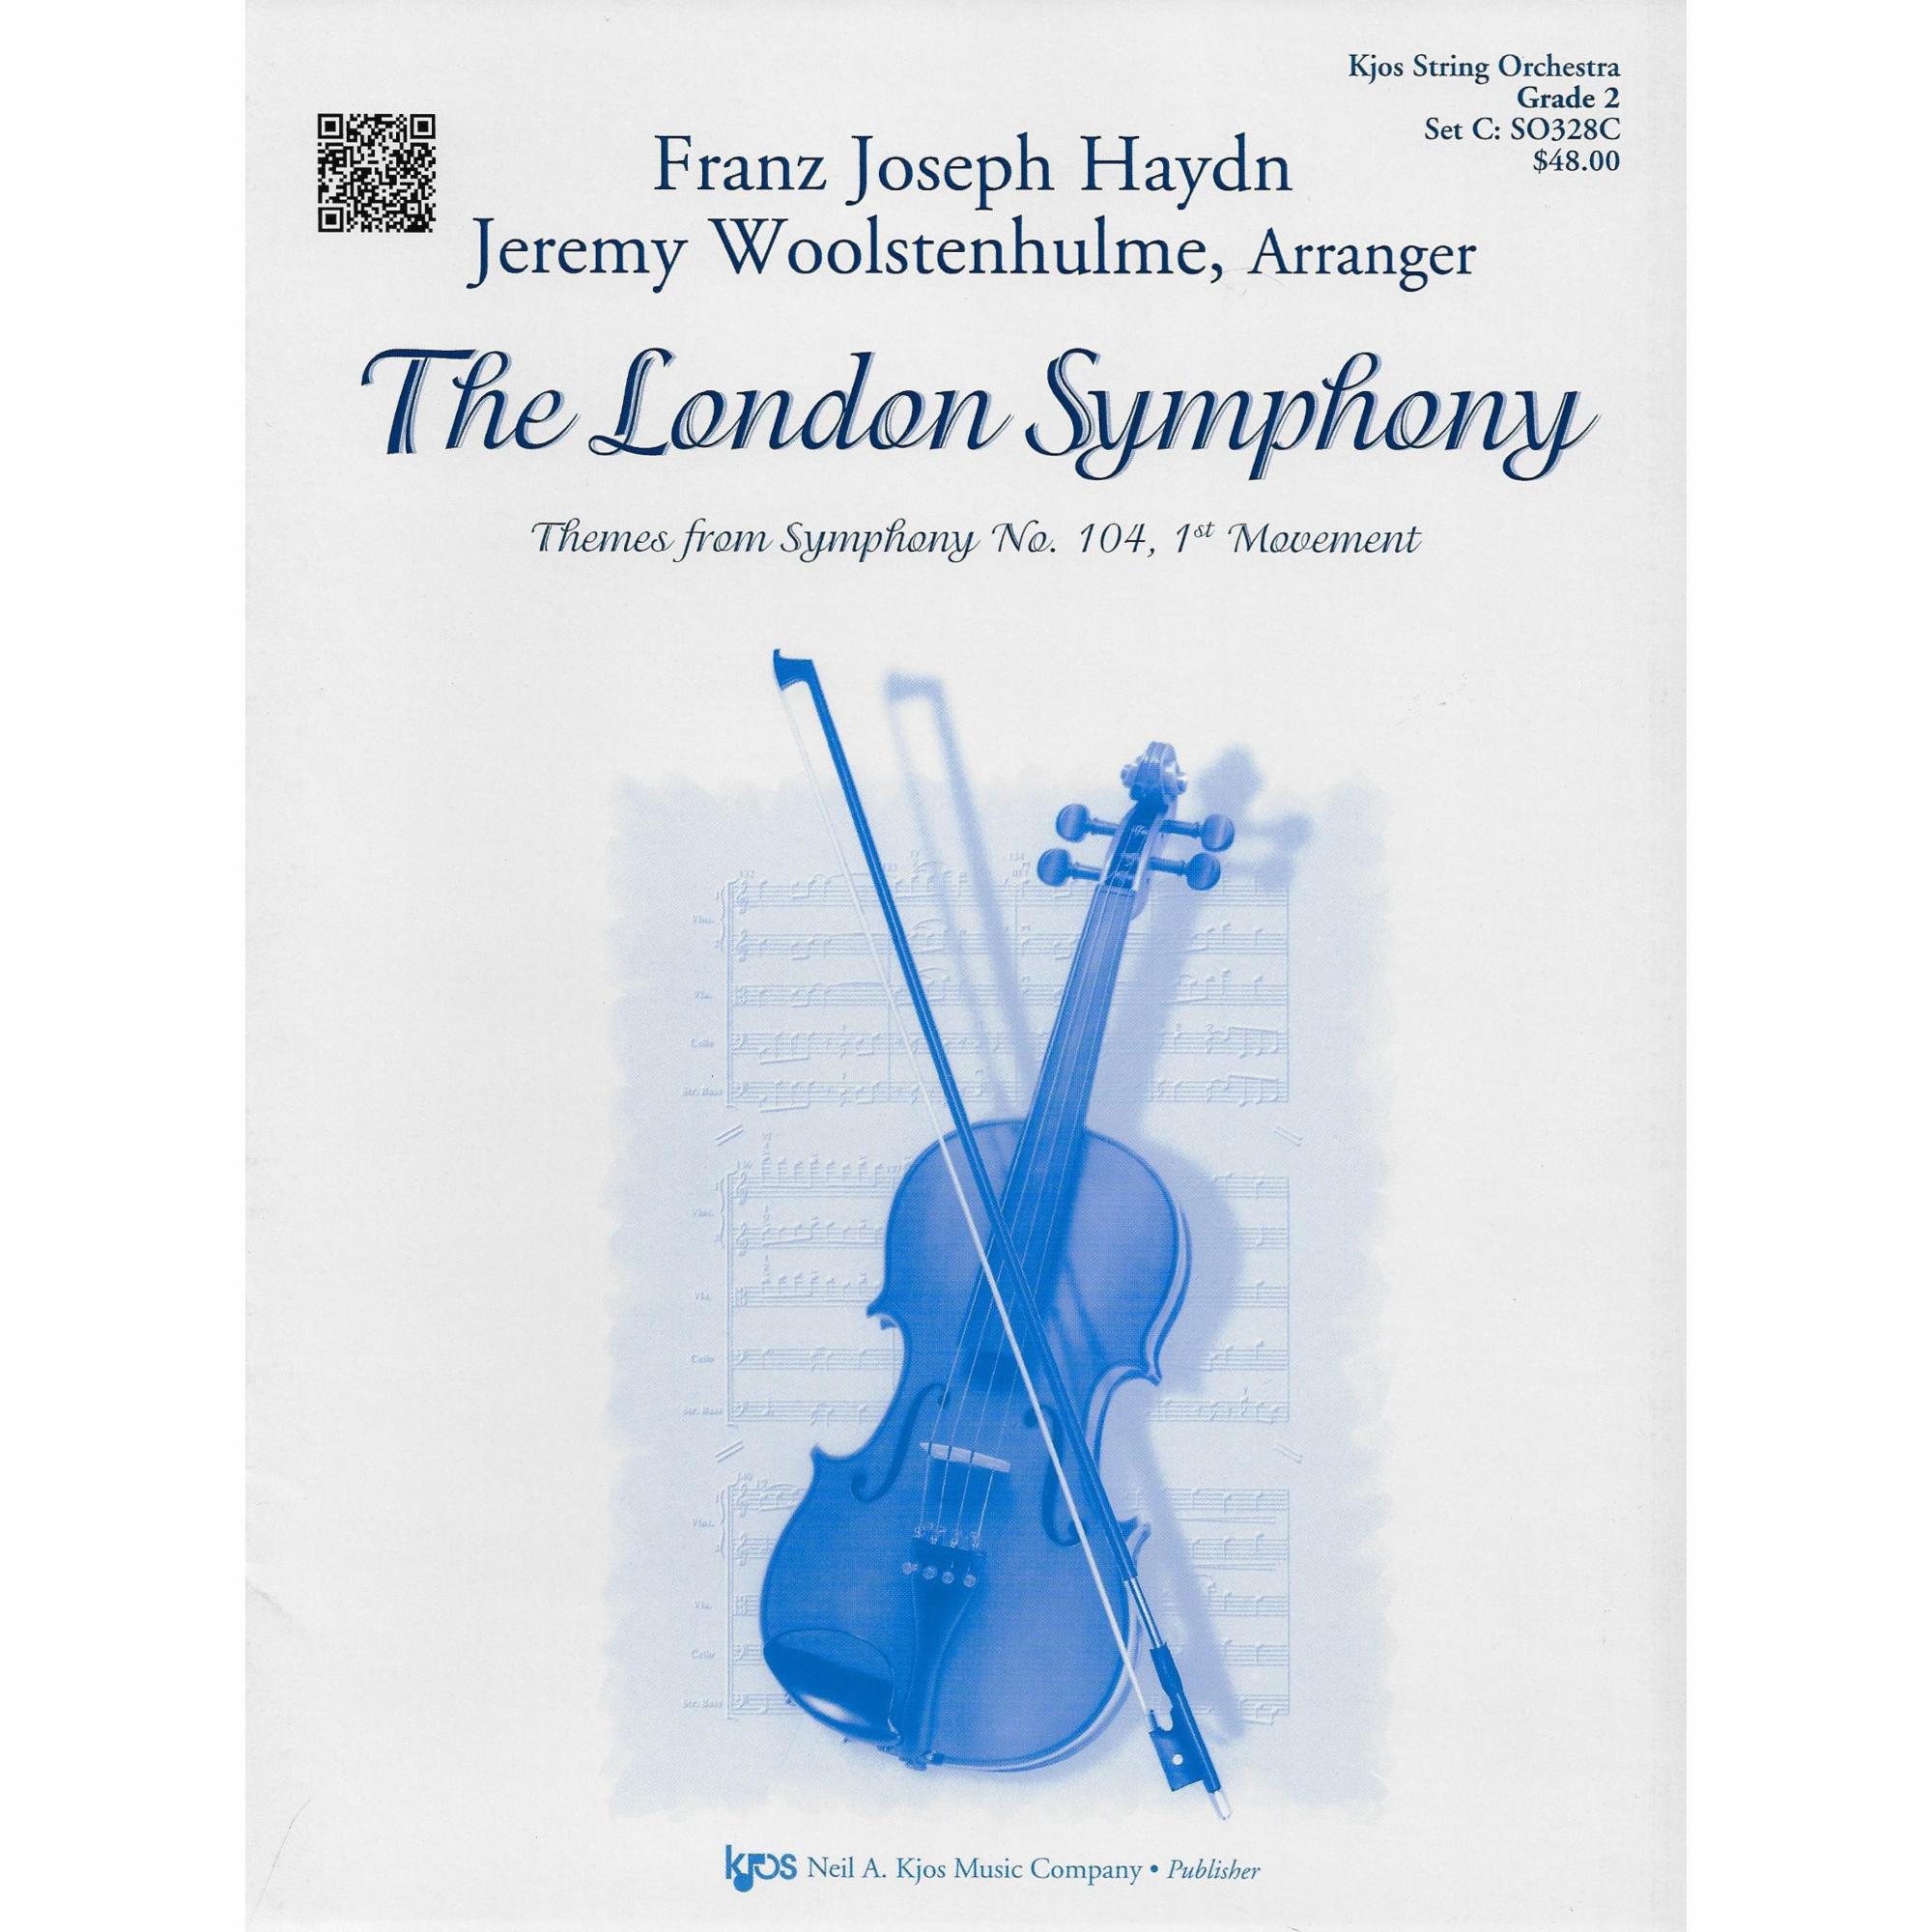 The London Symphony for String Orchestra